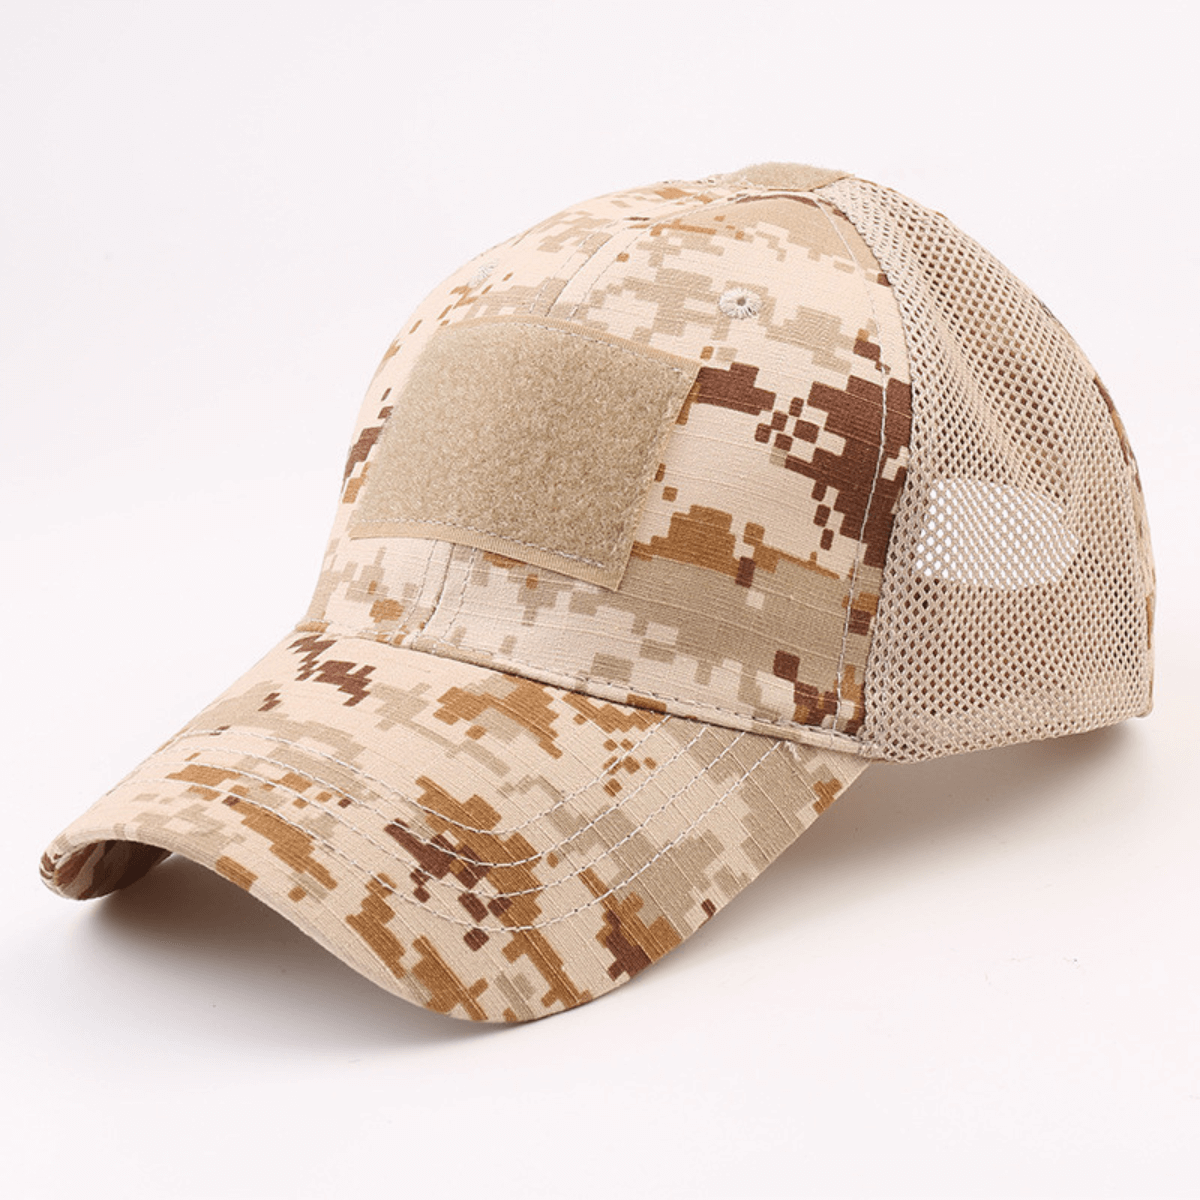 Tactical Military-Style with – Patch Urbanheer Hat Adjustable Strap